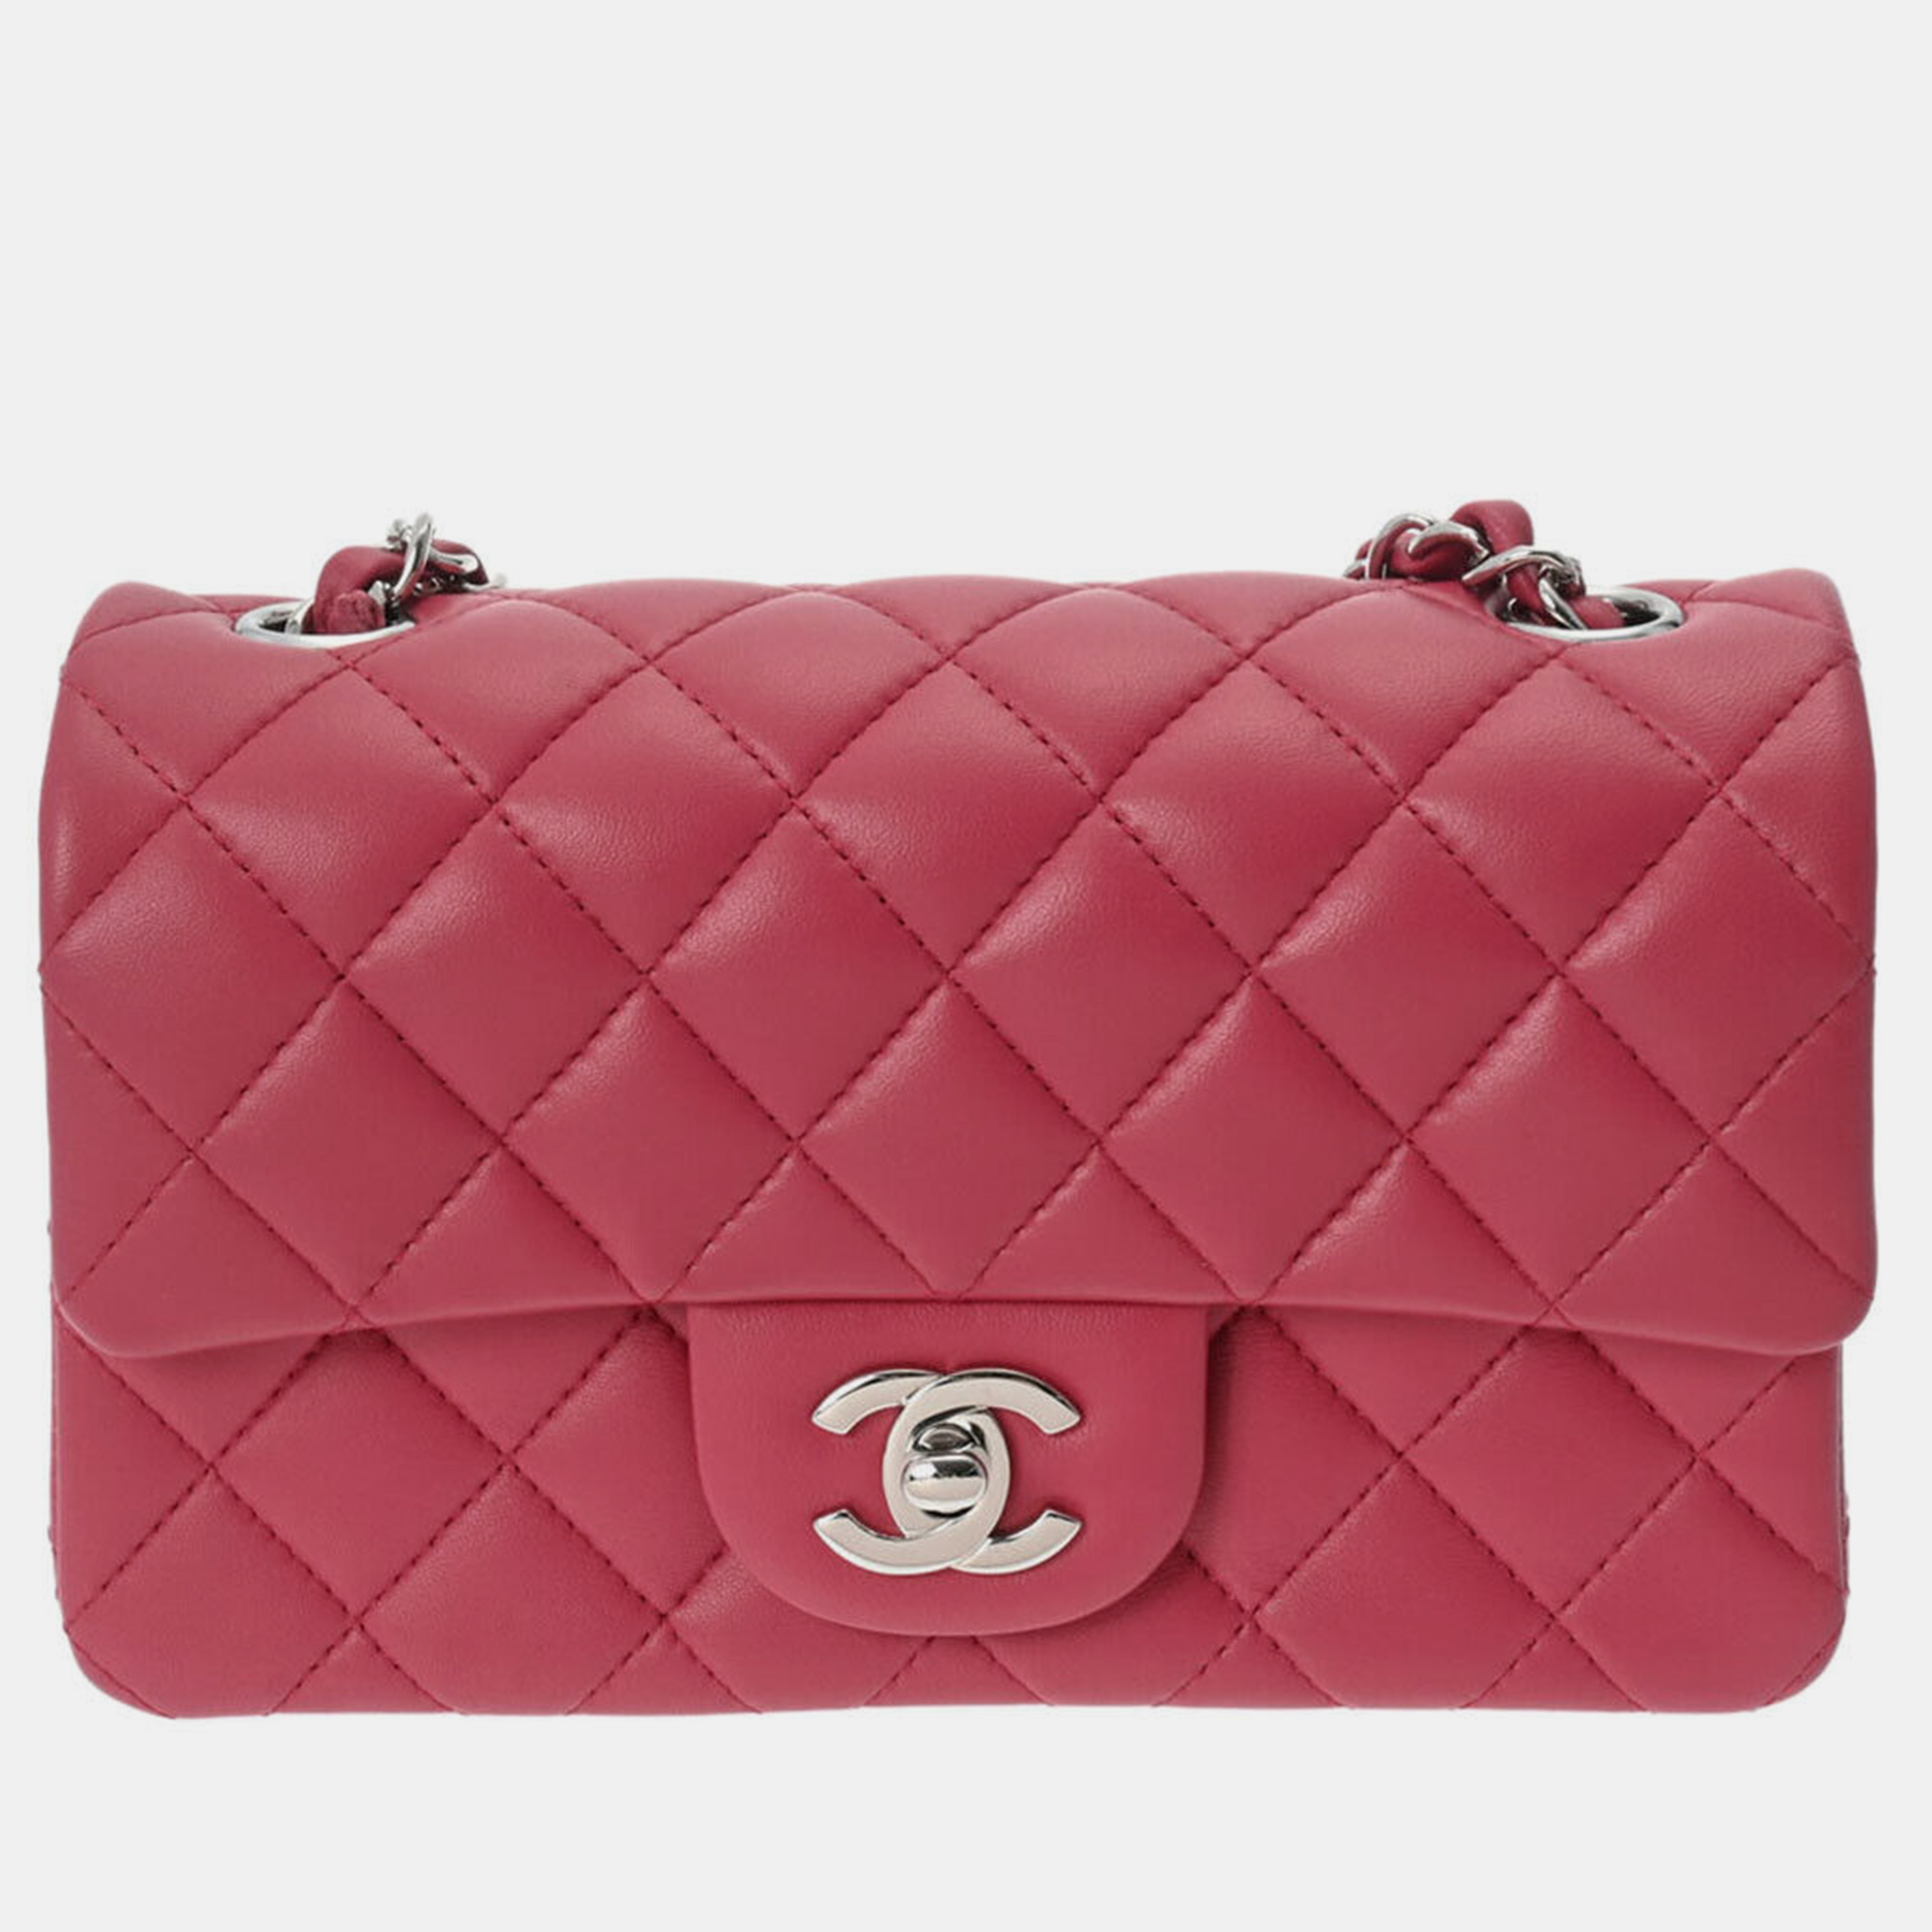 

Chanel Pink Leather Small Classic Double Flap Bag